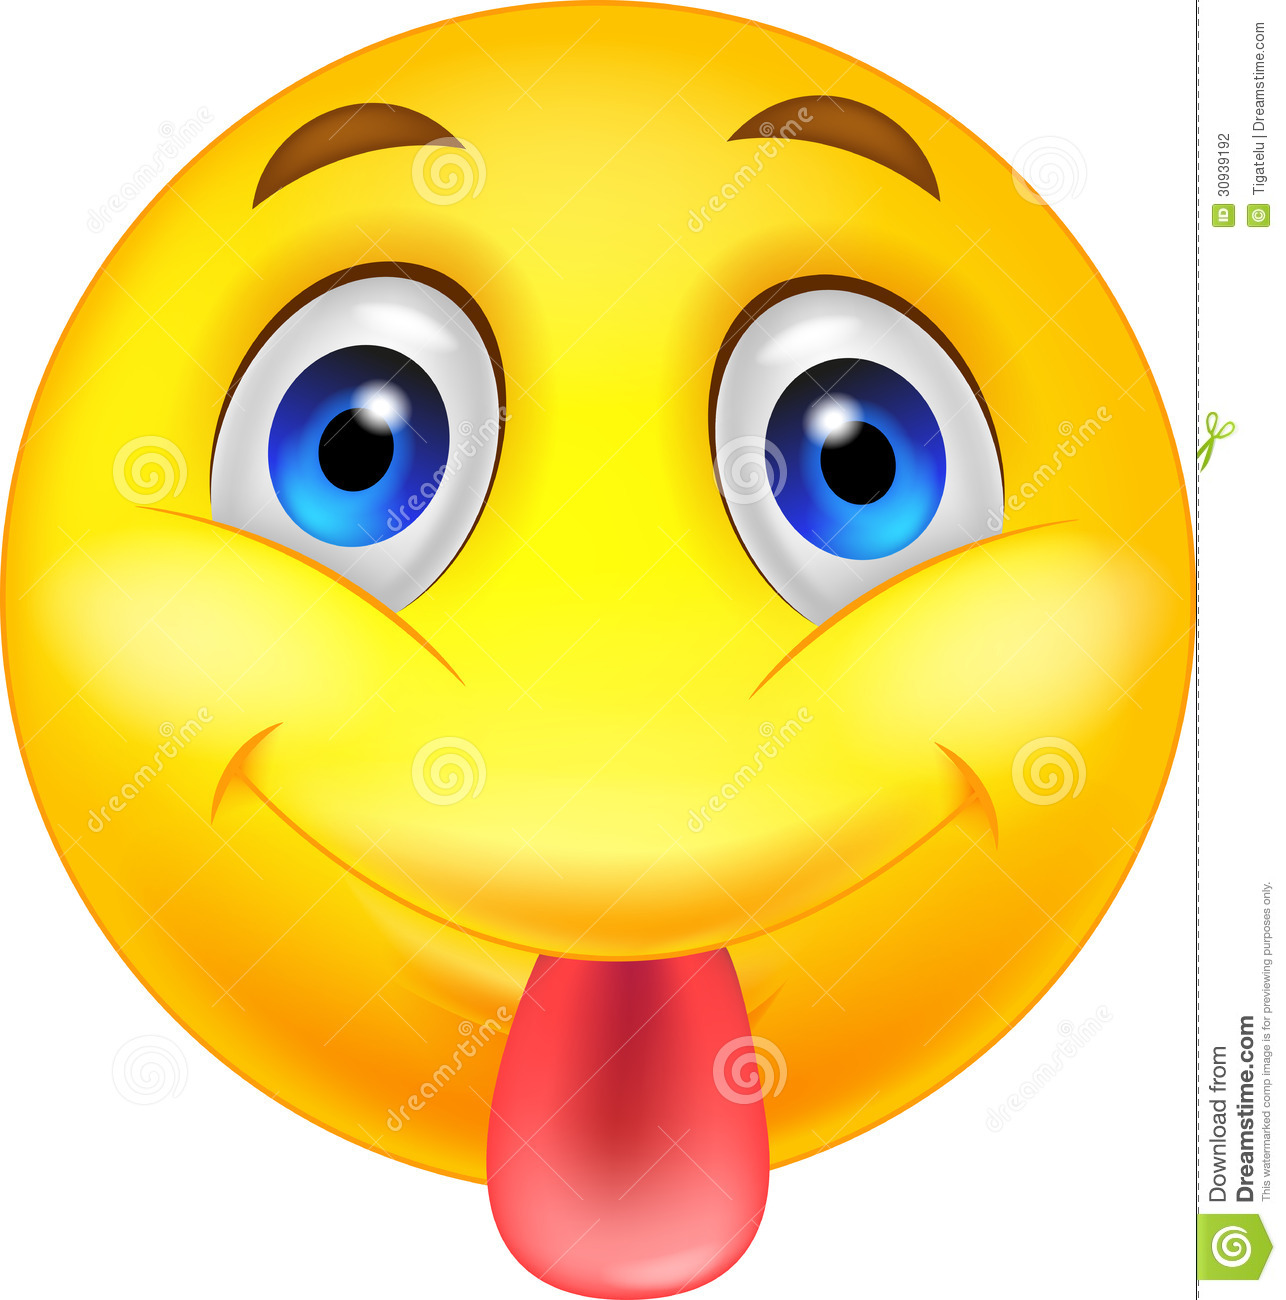 14 Smiley With Tongue Sticking Out Emoticon Images